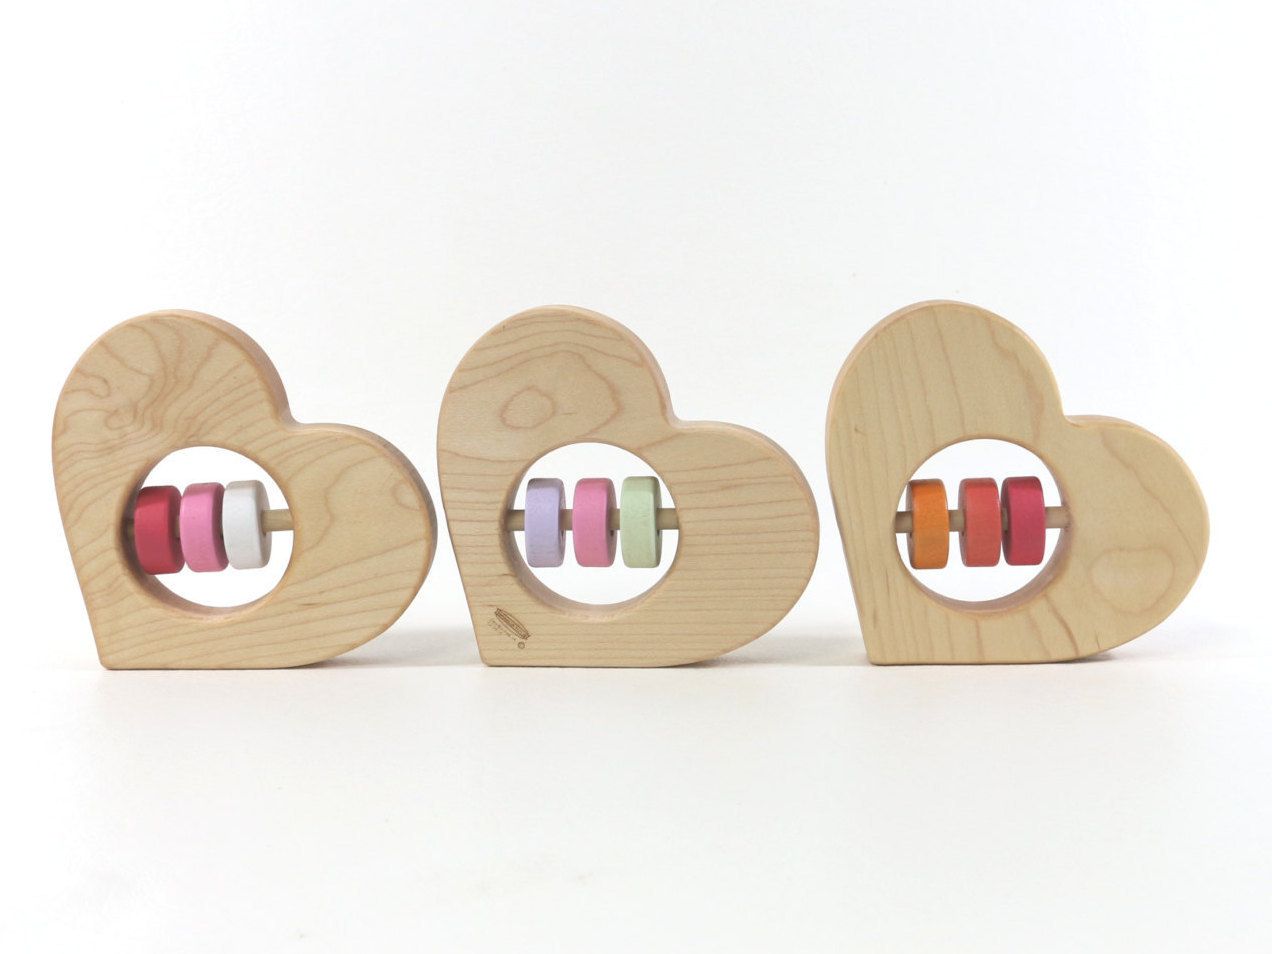 Handmade wooden heart rattles in your choice of colors: Cute Valentine's Day gift ideas for babies